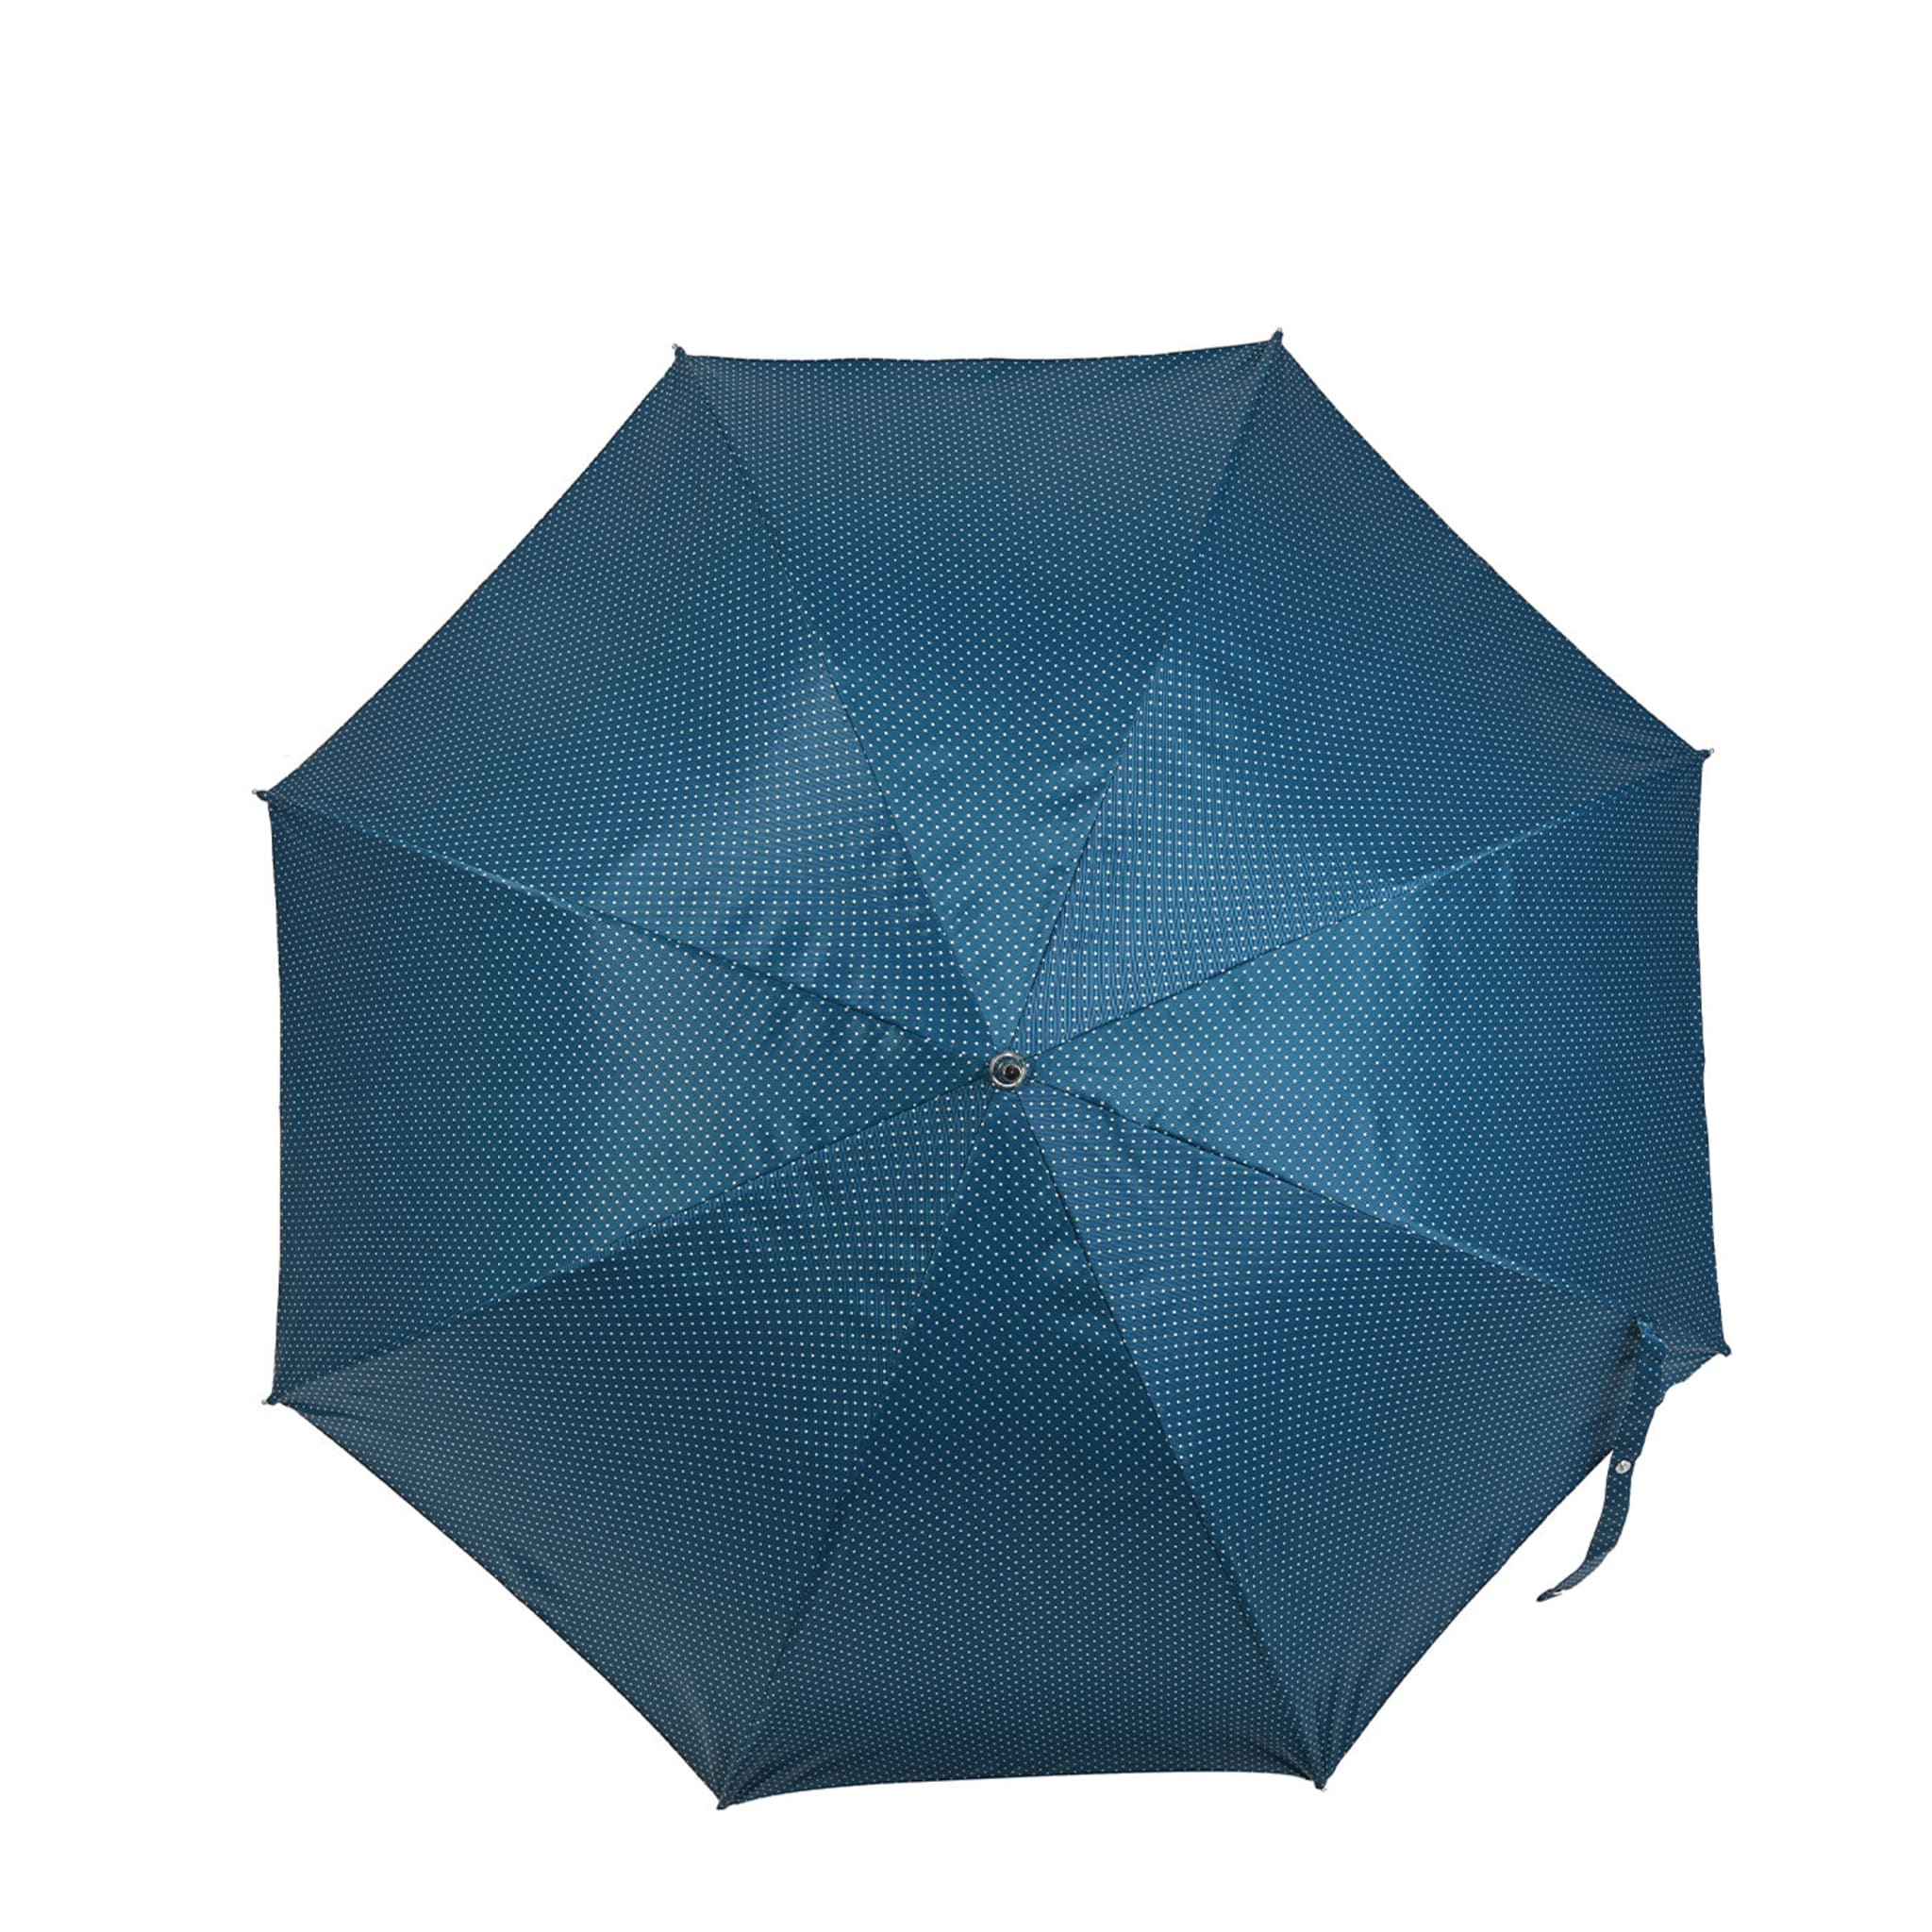 Teal and White Polka Dots Umbrella with Fluorescent Skull Handle - Alternative view 2